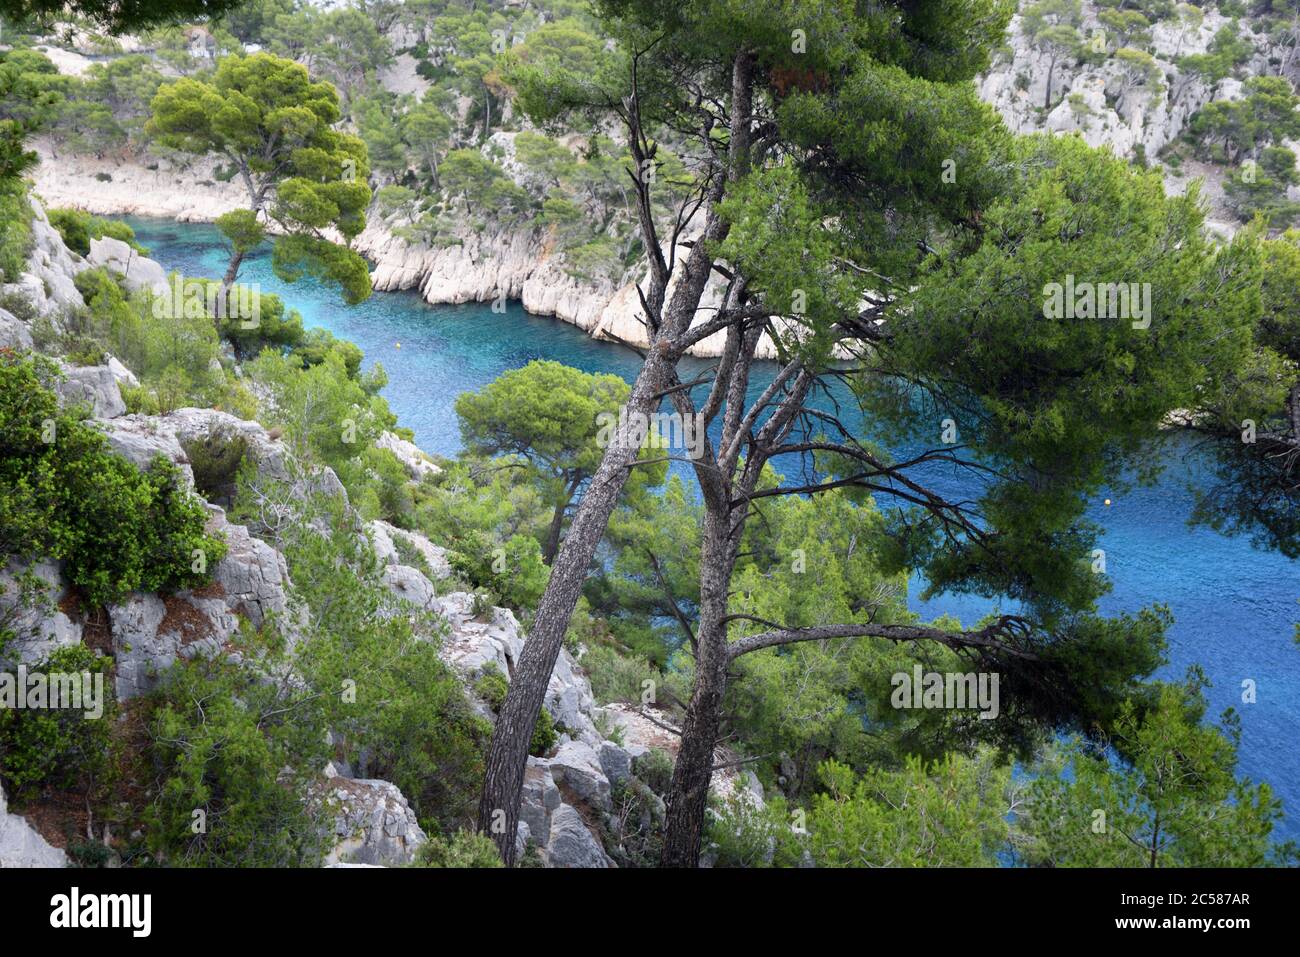 Aleppo Pines or Pine Trees, Pinus halepensis, in Calanque Port-Pin in the Calanques National Park near Cassis Provence France Stock Photo